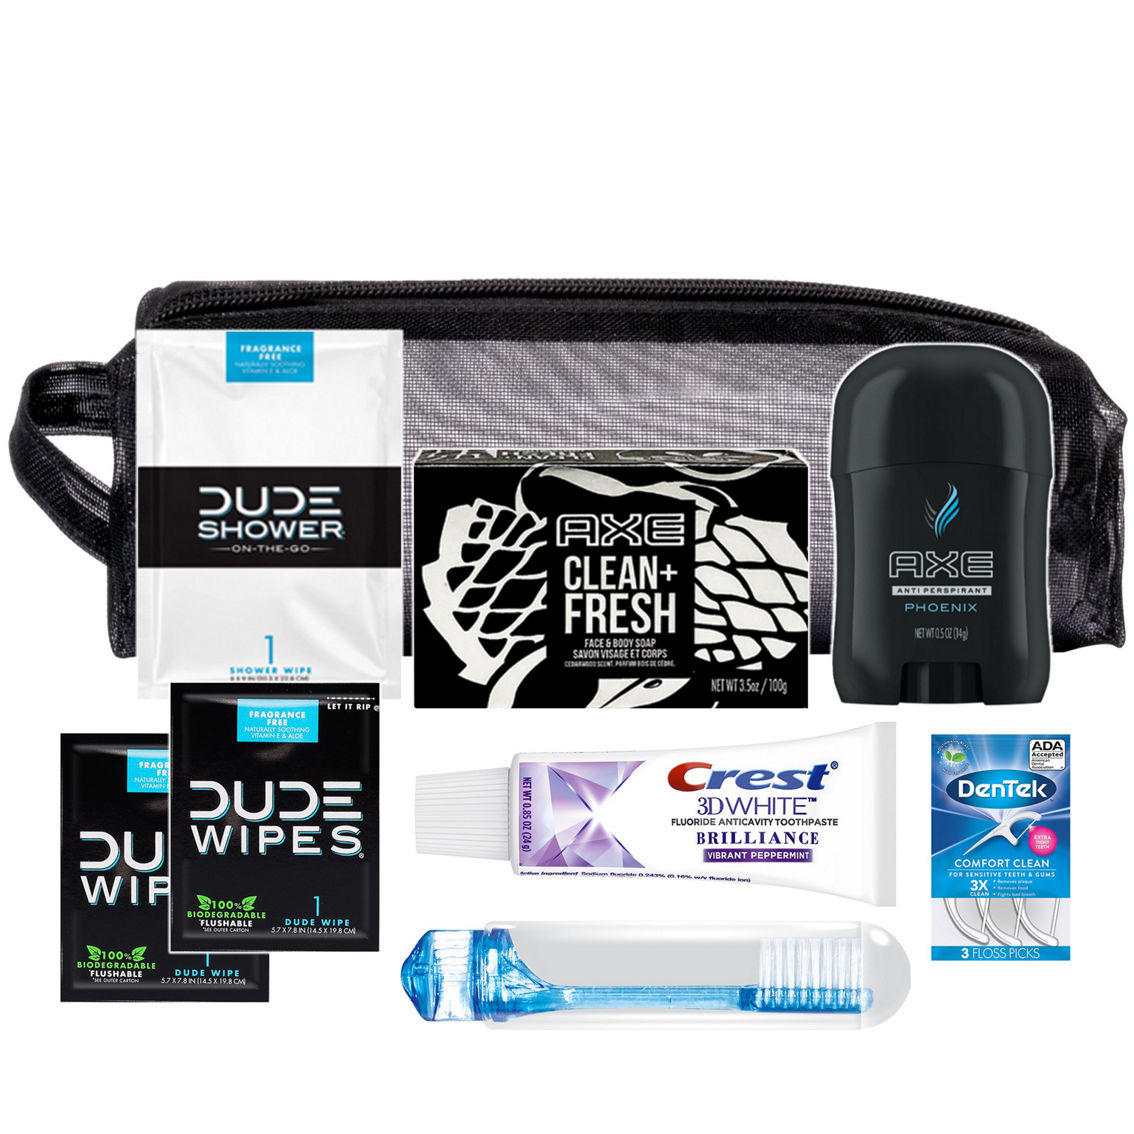 Convenience Kits Deluxe AXE 9 pc. Travel Kit - Image 2 of 2